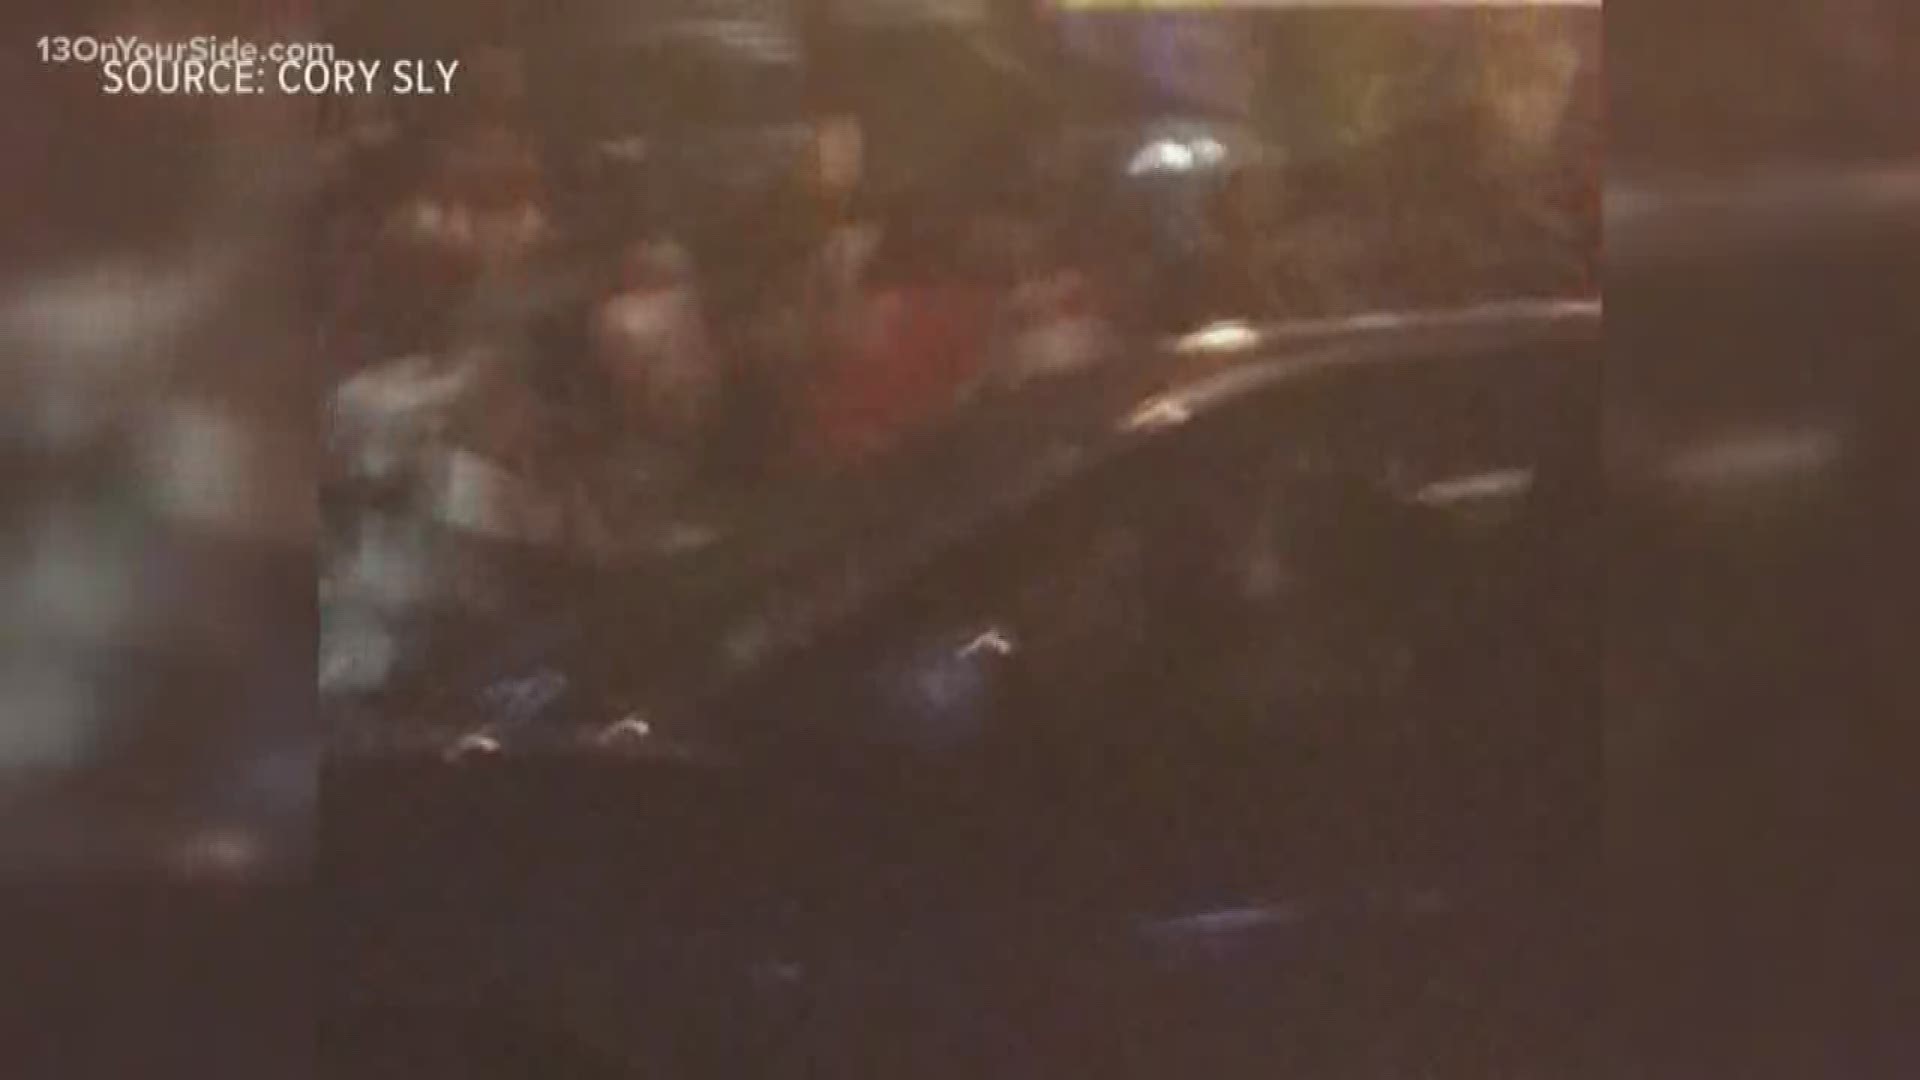 Violence breaks out in Grand Rapids during fireworks show